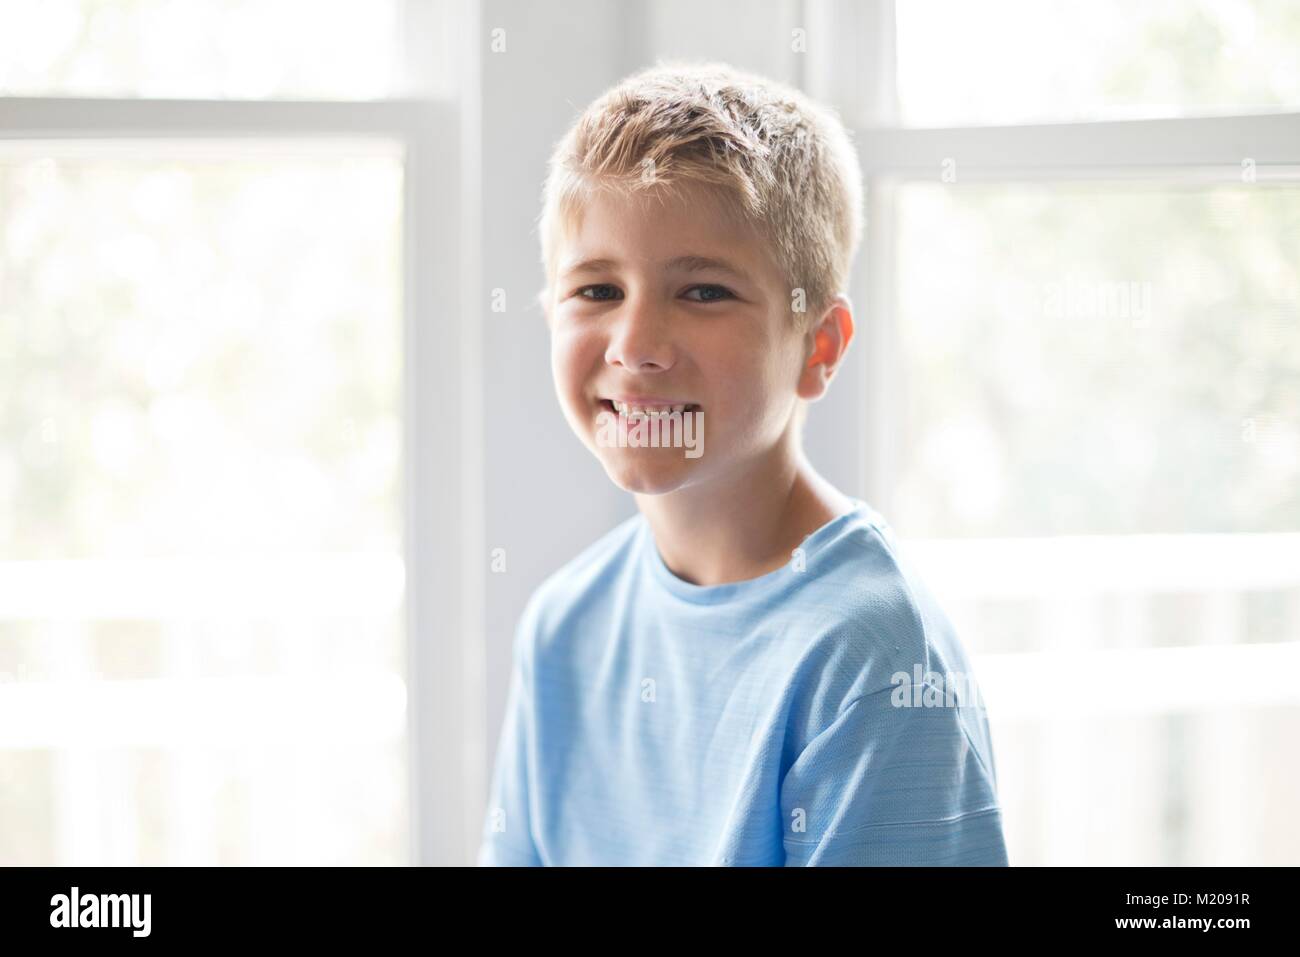 Portrait of a young boy smiling towards the camera. Stock Photo